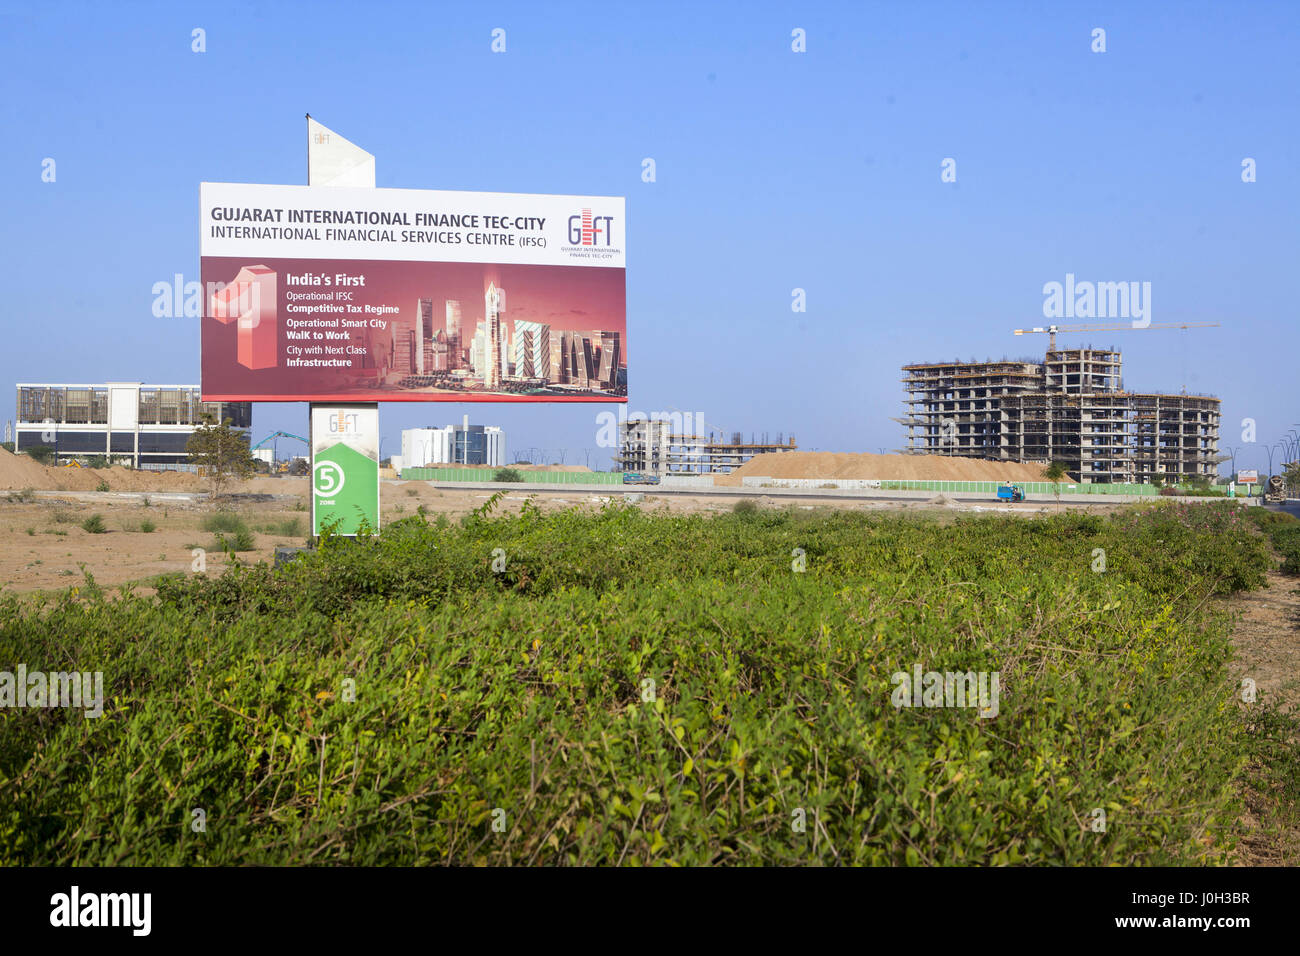 Gift City, Gujarat, India. 20th Mar, 2017. 20 March 2017 - GIFT city, India.Construction of Towers in progress at the GIFT city near Ahmedabad in Gujarat to House Companies involved in the Financial sector. Credit: Subhash Sharma/ZUMA Wire/Alamy Live News Stock Photo